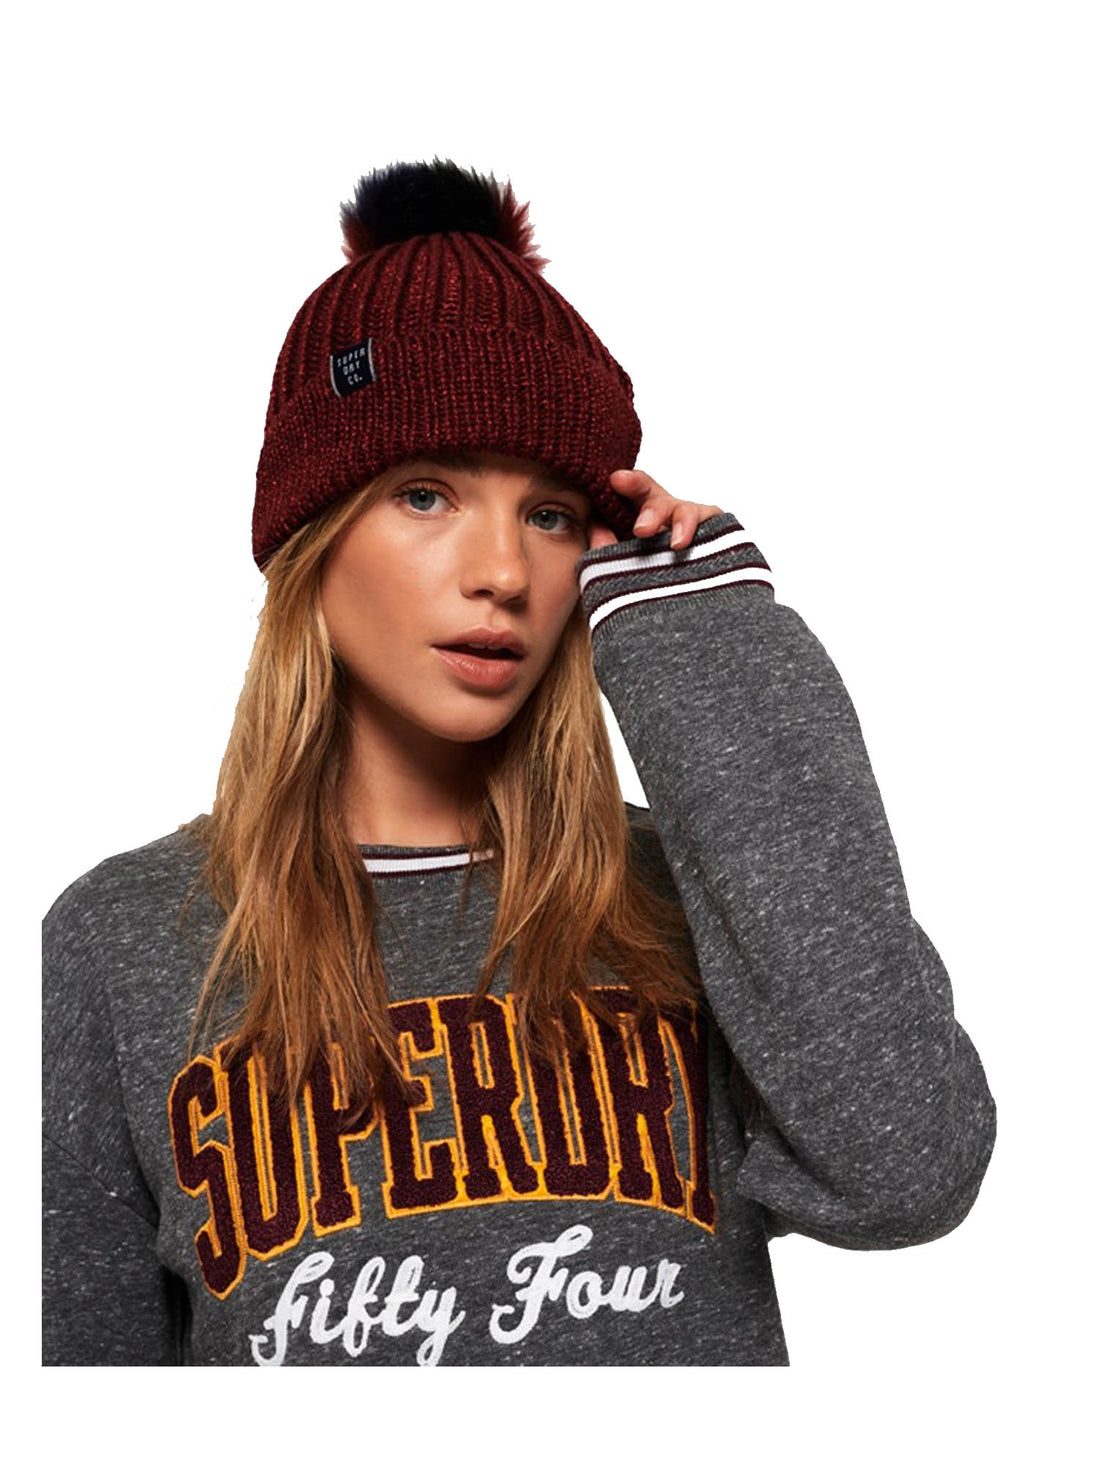 Cappelli Rosso Superdry